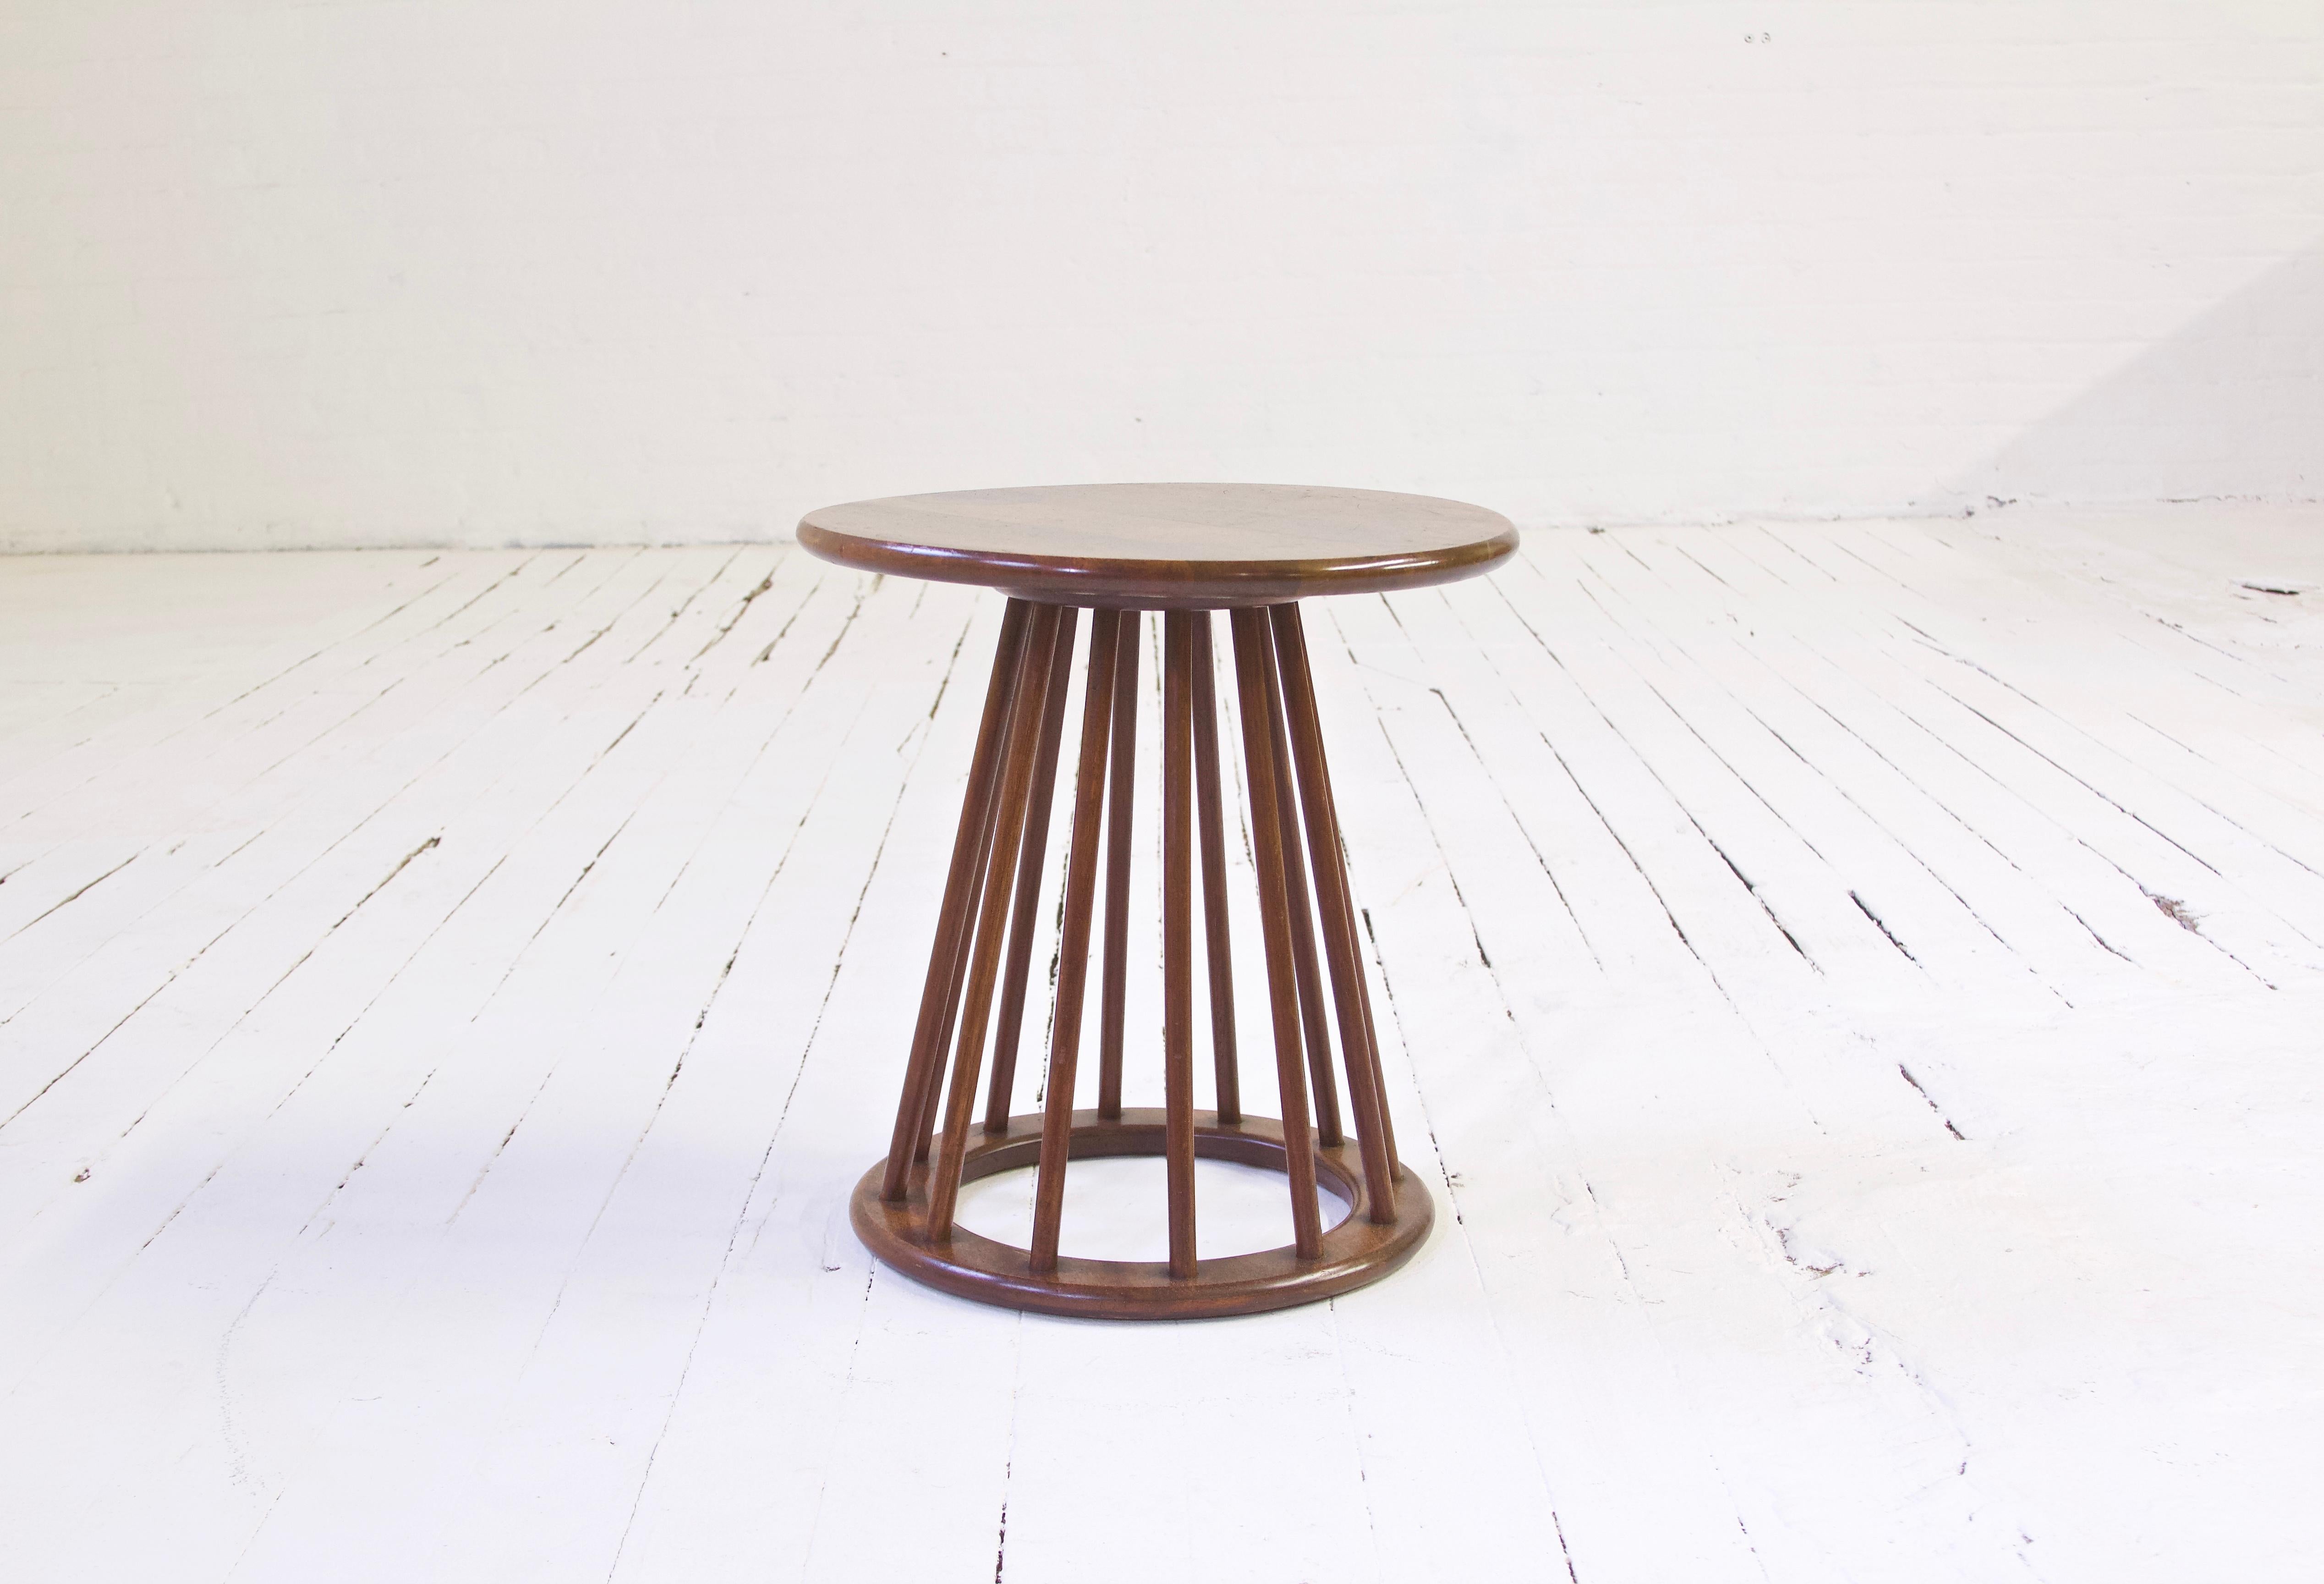 A Classic piece of Mid-Century Modern Americana--Arthur Umanoff's petite but well-conceived spindle-base end table in solid American Black Walnut. Works well as a Stand for plants or a decorative element, occasional table, and can be used gently as